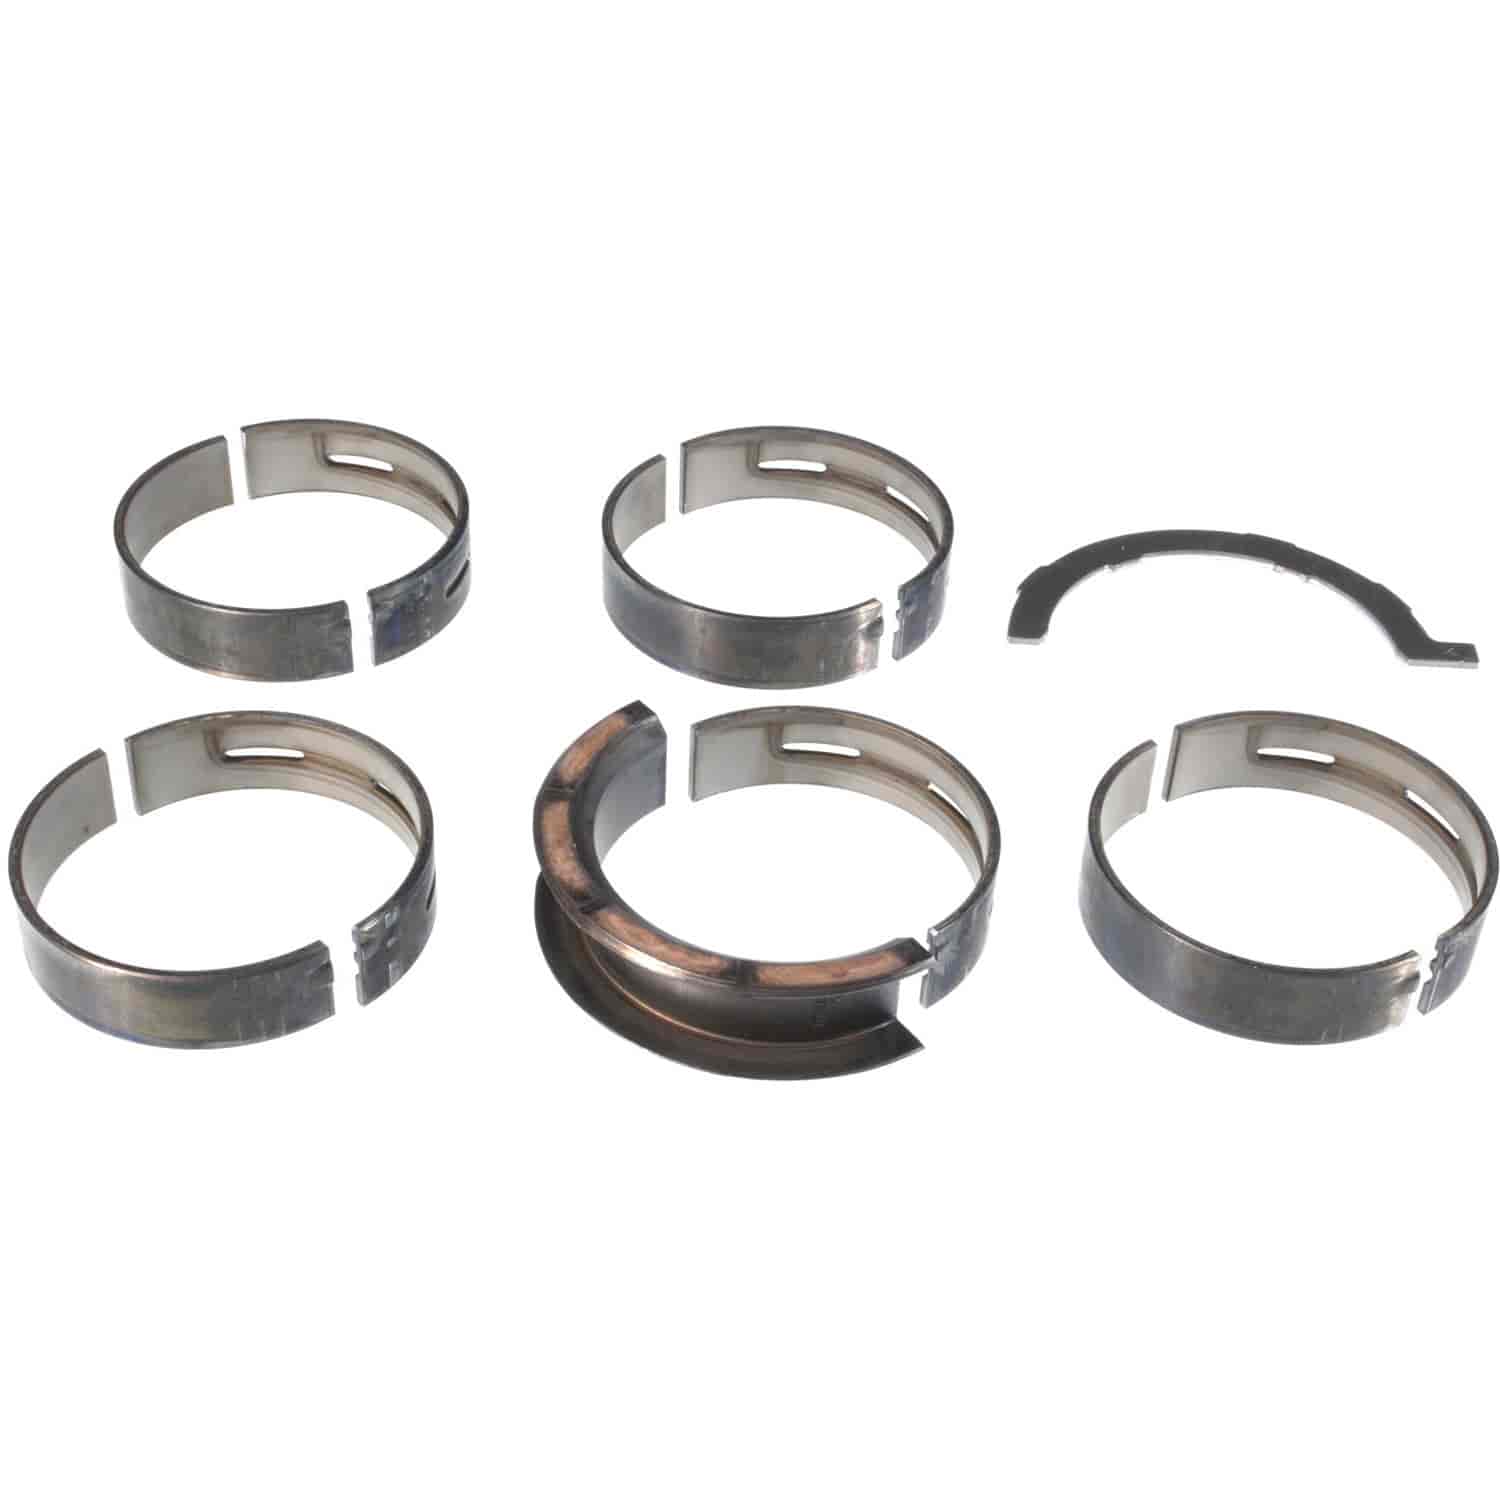 Main Bearing Set Ford 2011-2014  V8 Coyote 5.0L with -.026mm Undersize